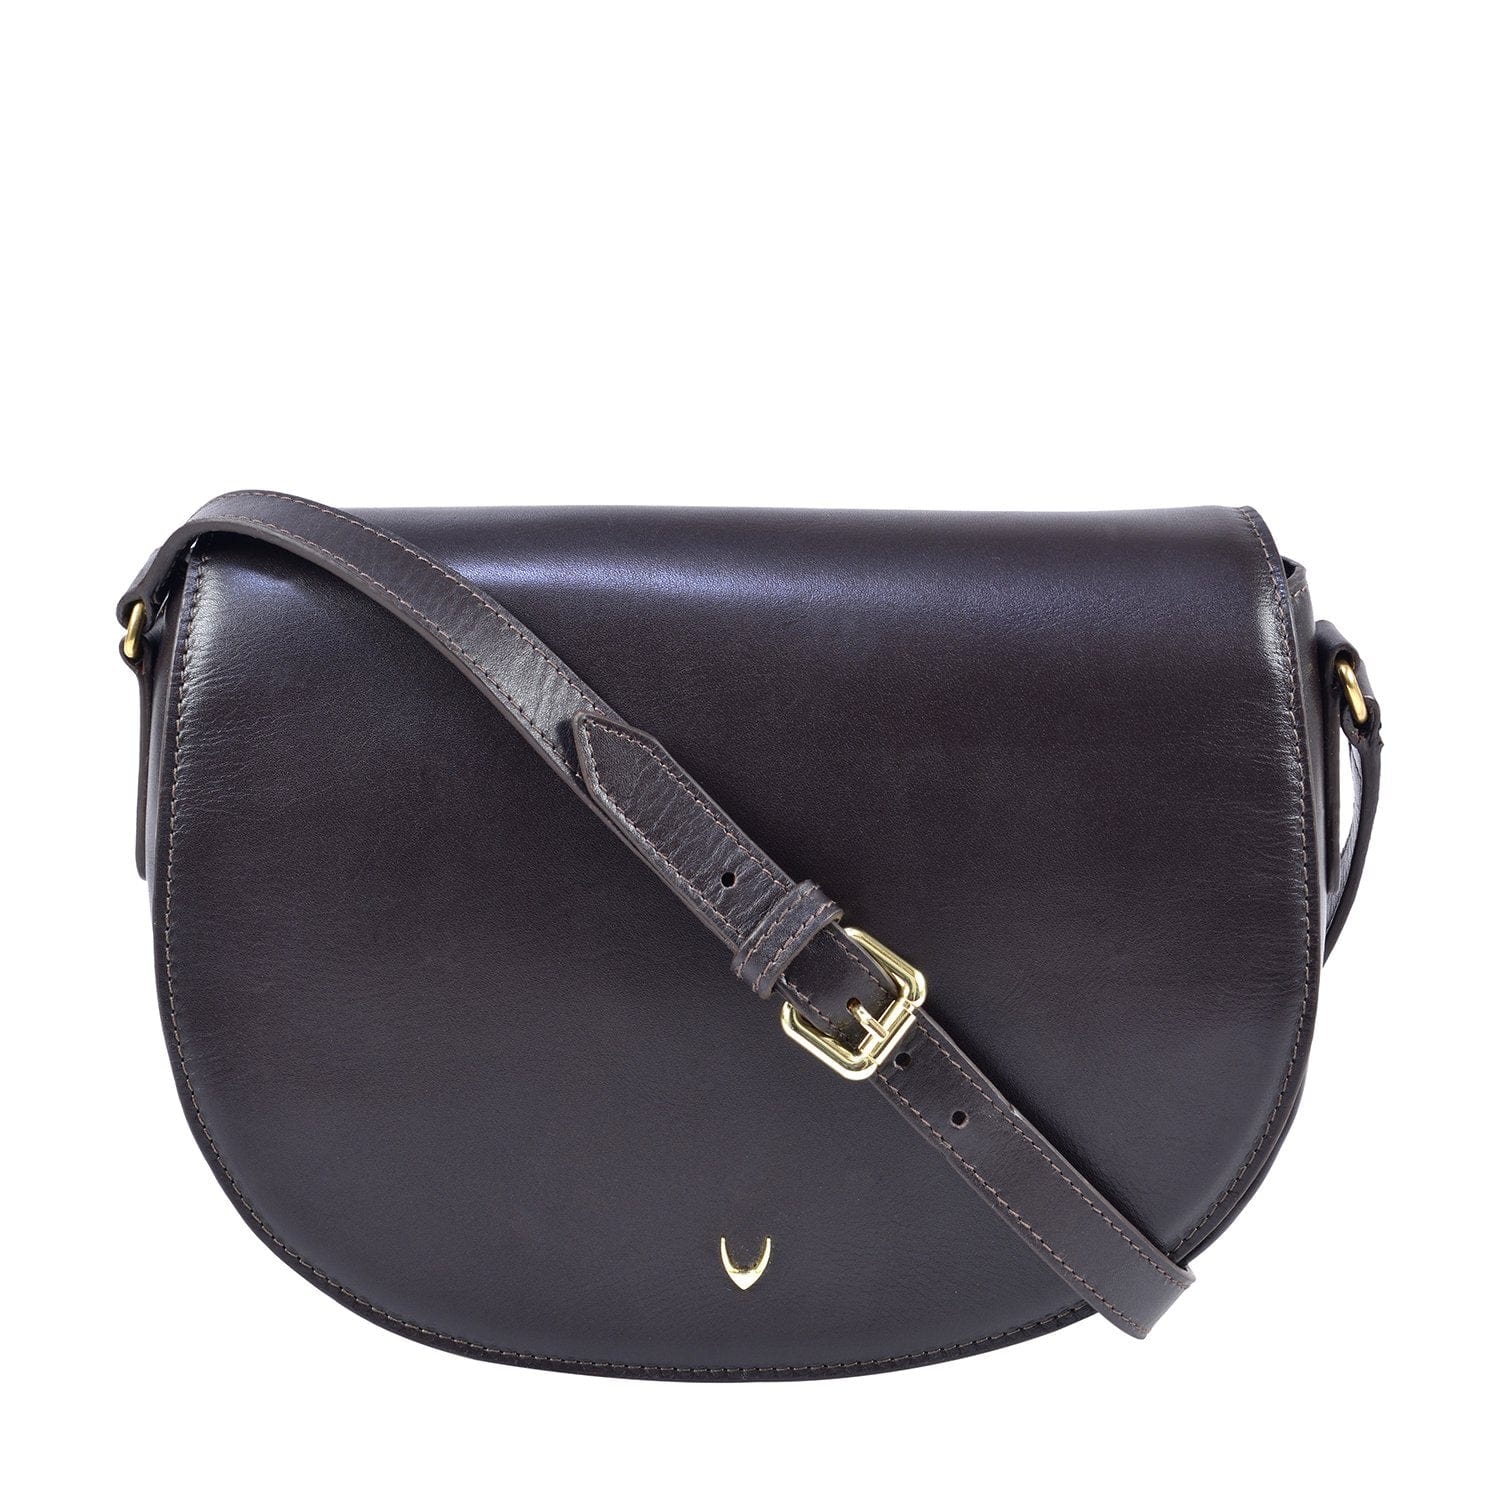 Nelly Classic Leather Crossbody Bag